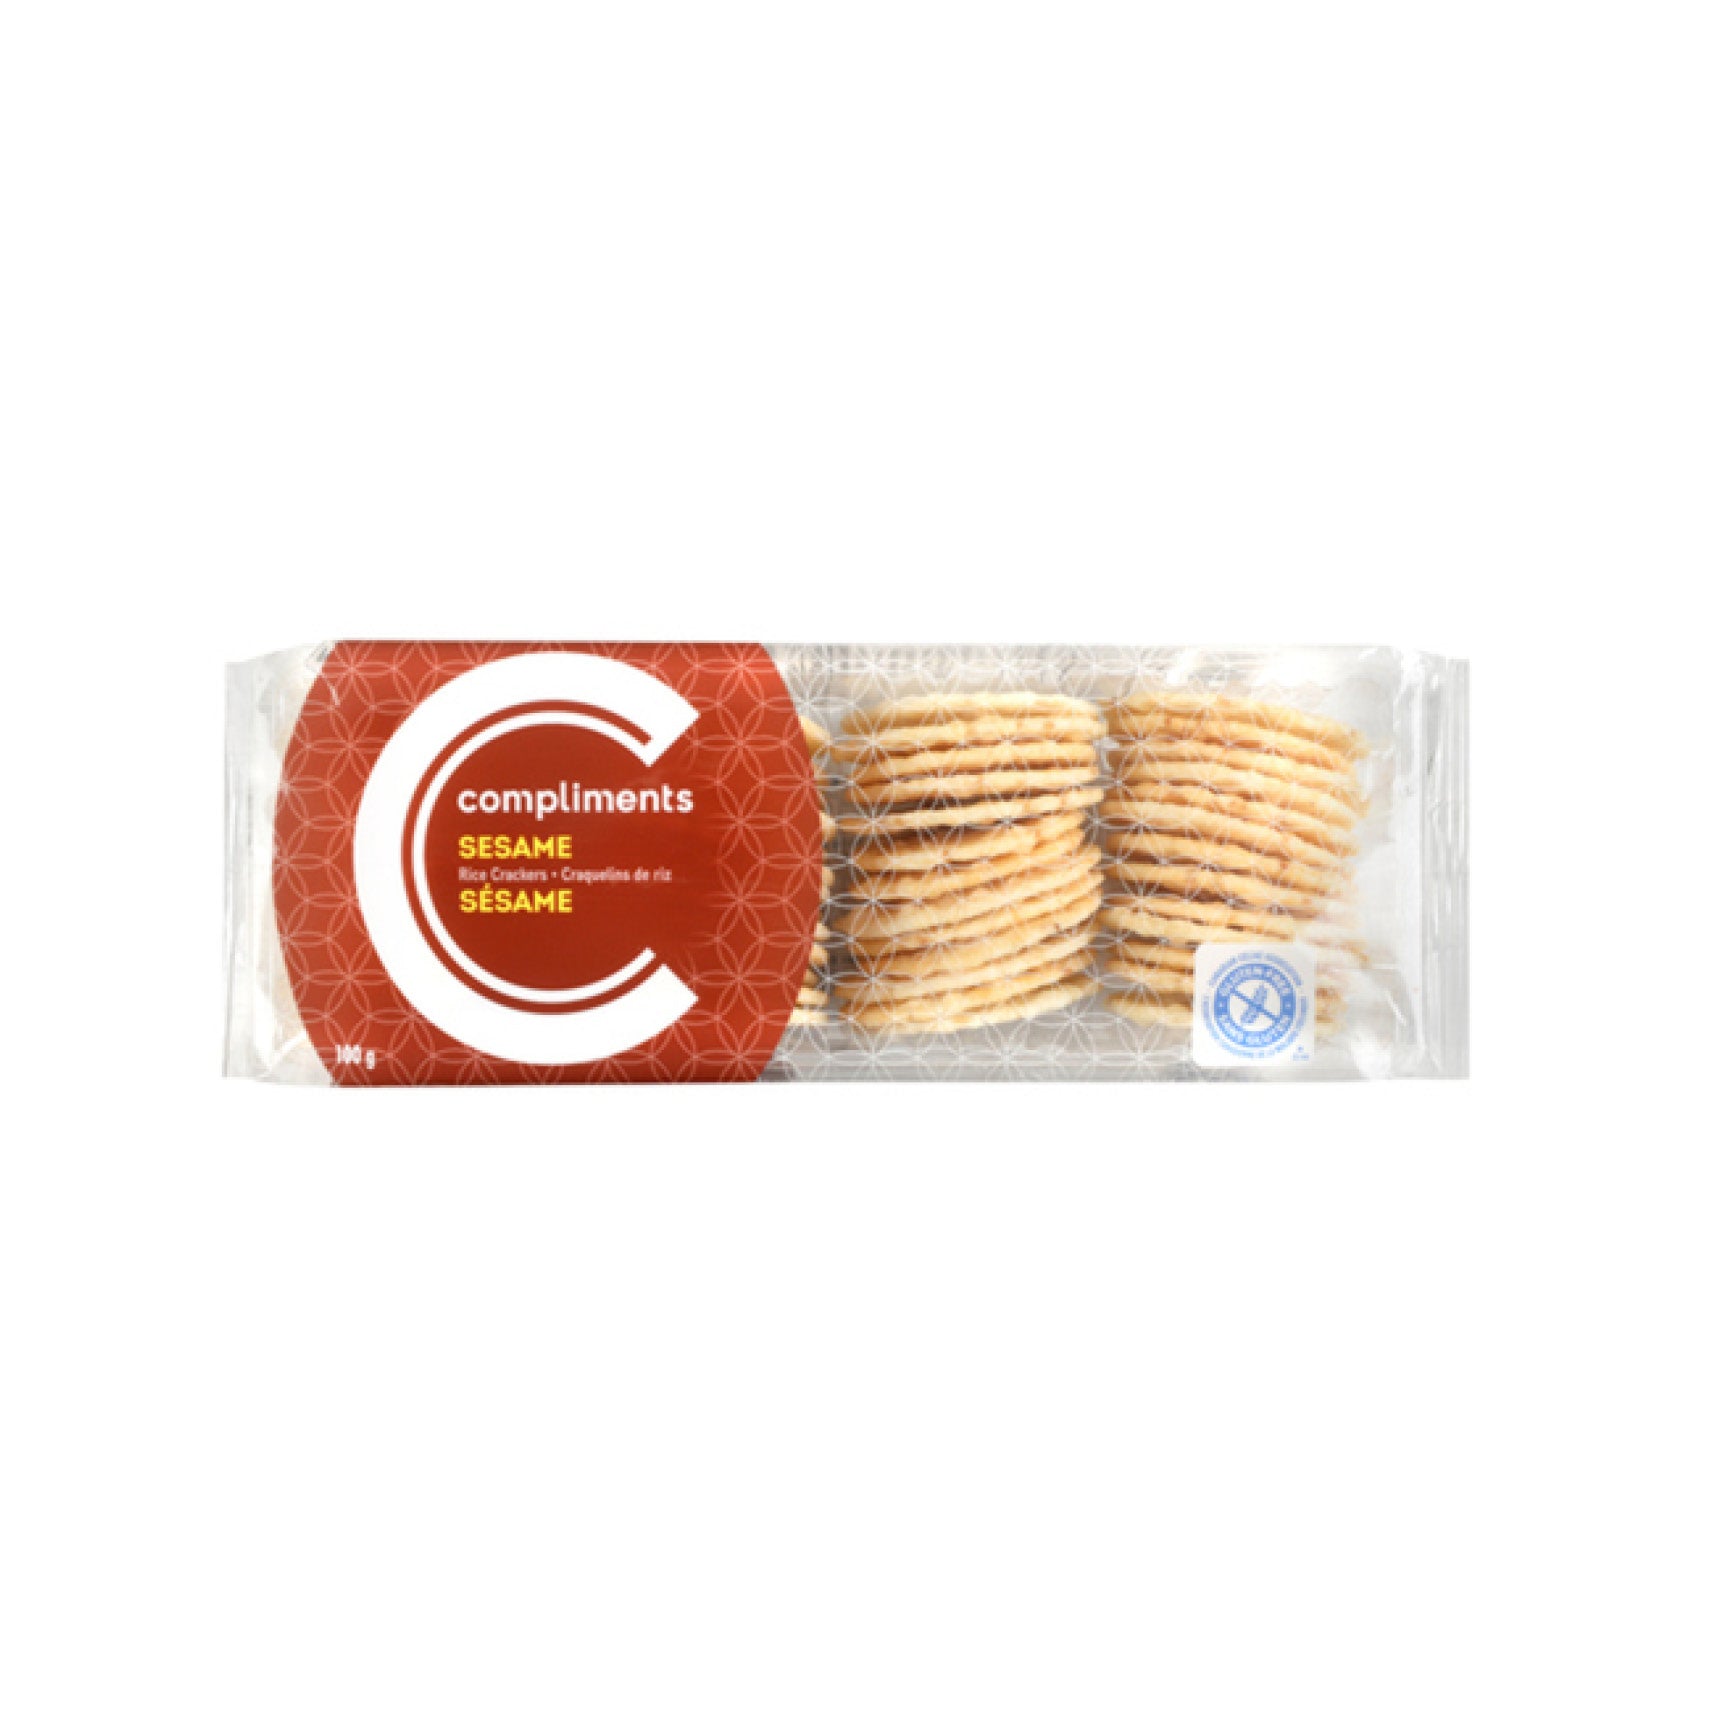 Compliments Sesame Rice Crackers,100g